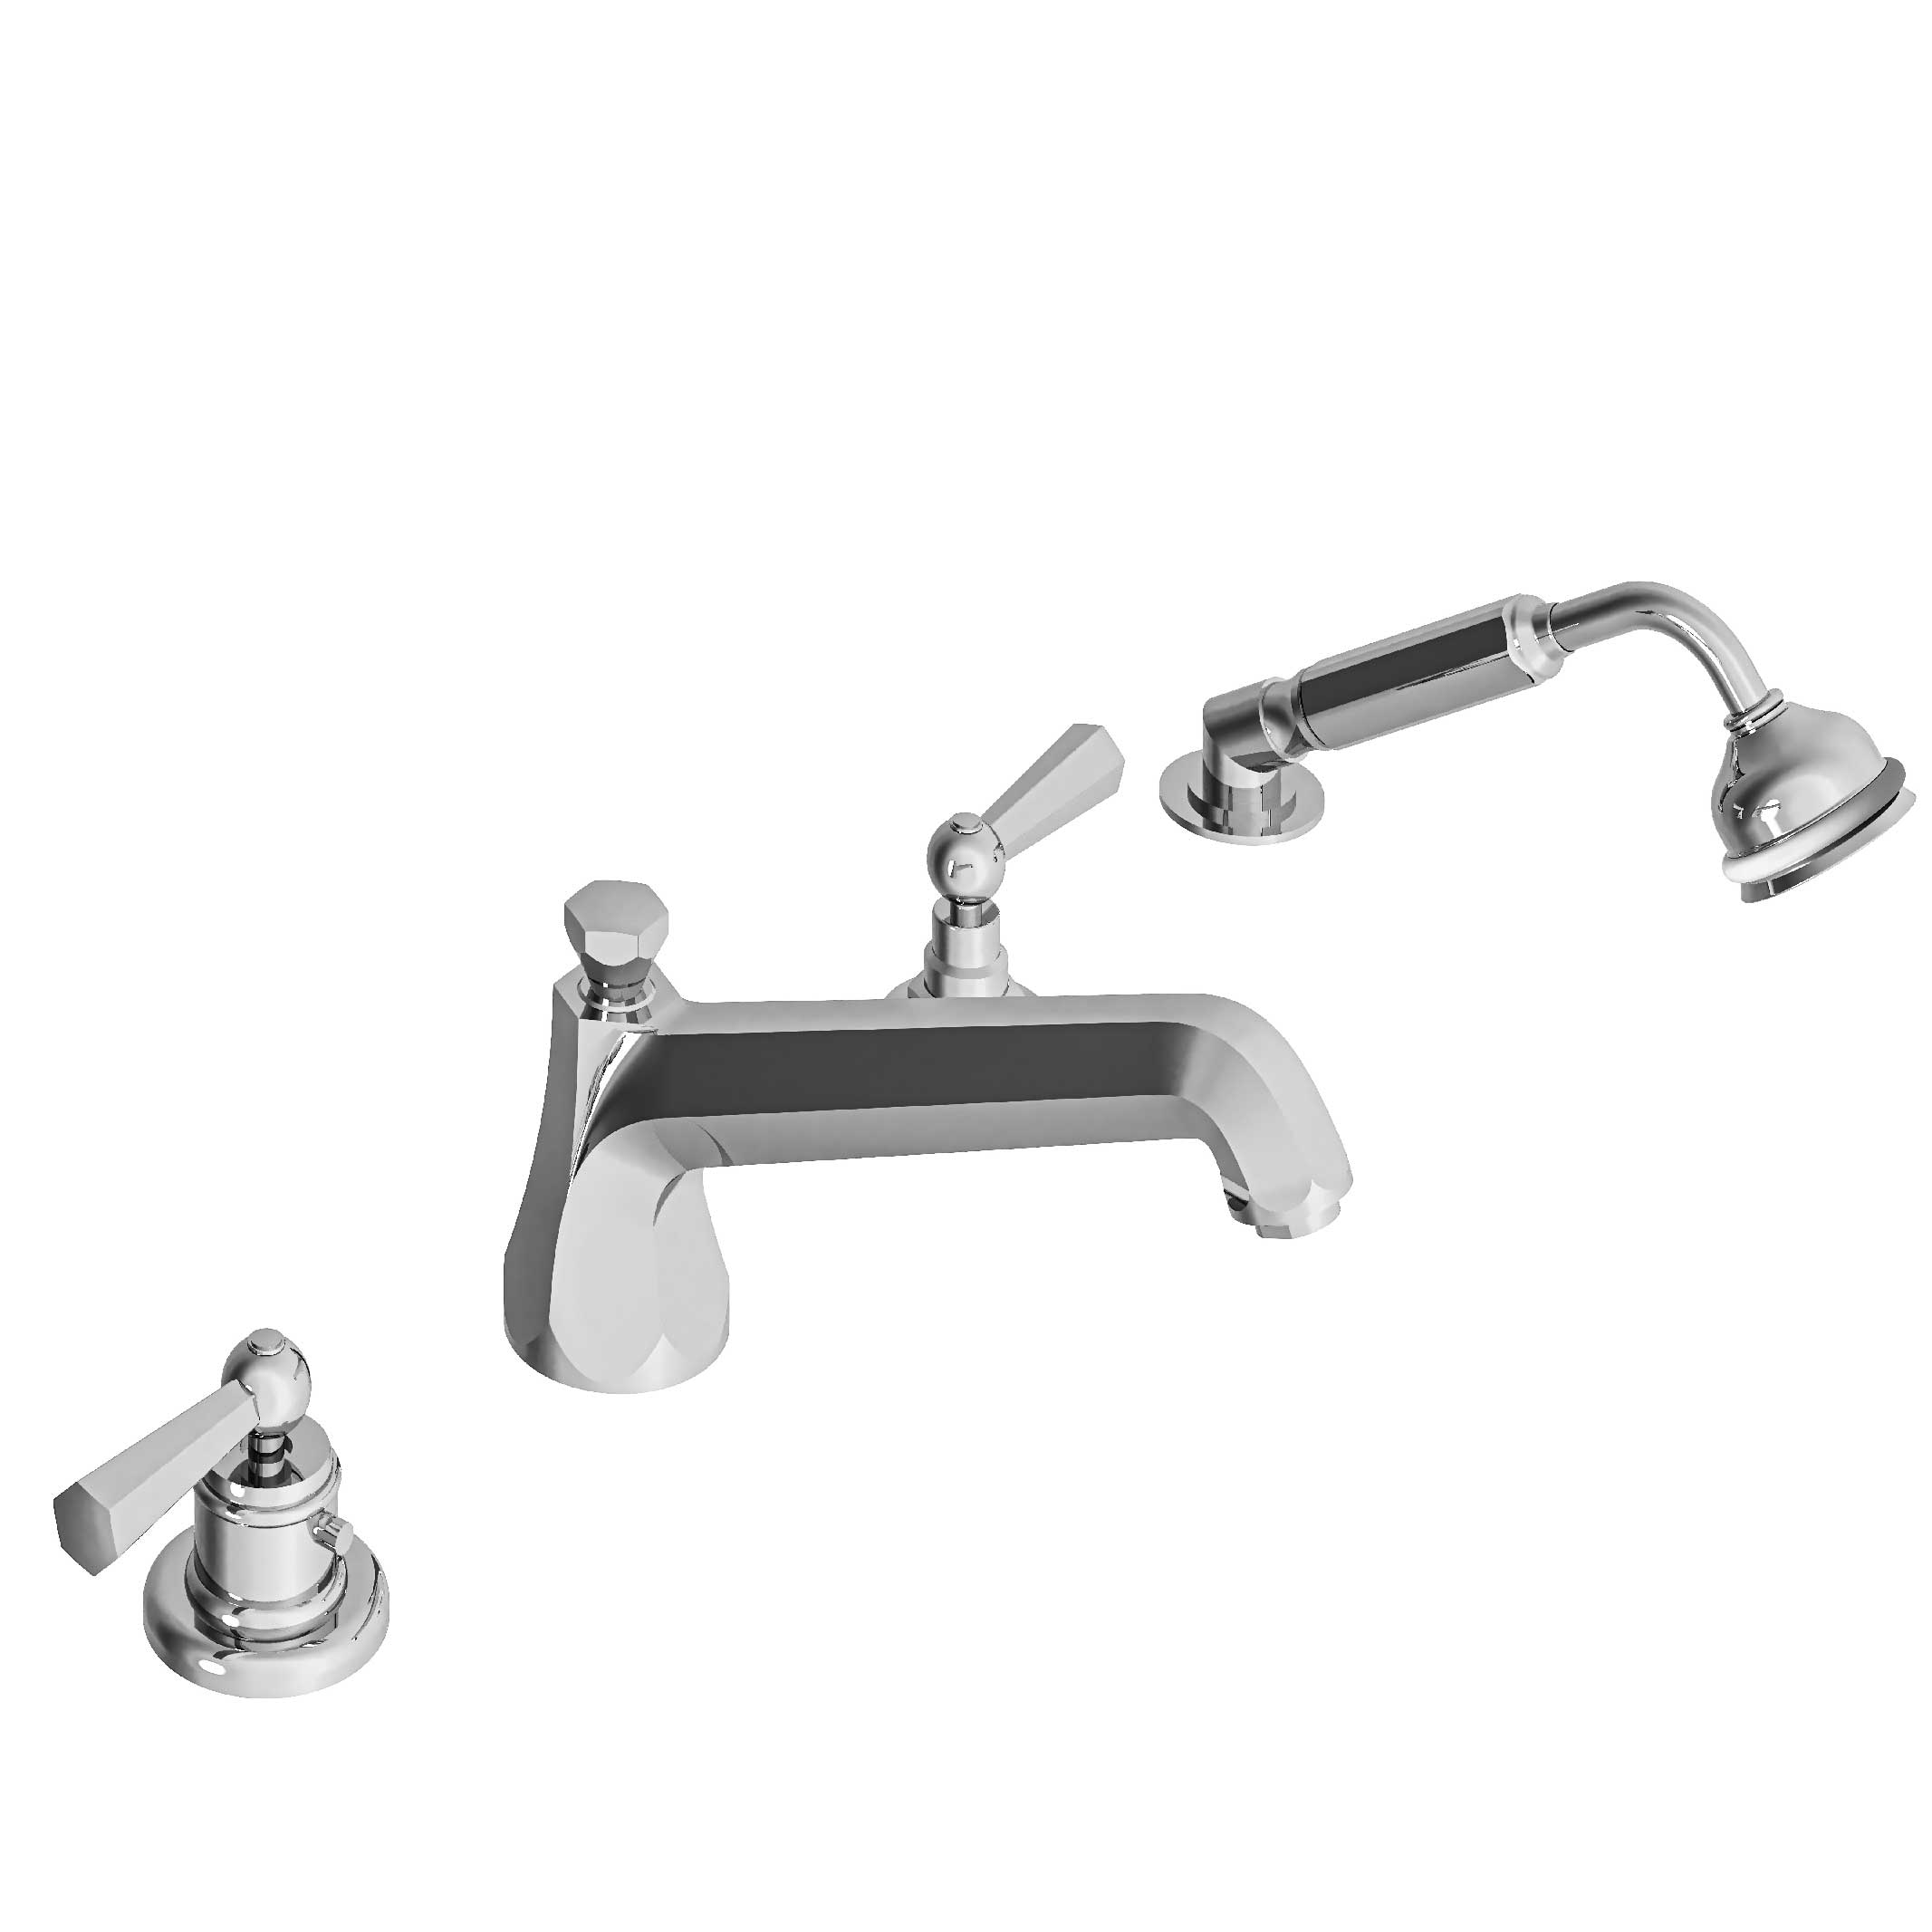 M39-3304TXL XL 4-hole bath and shower thermo. mixer